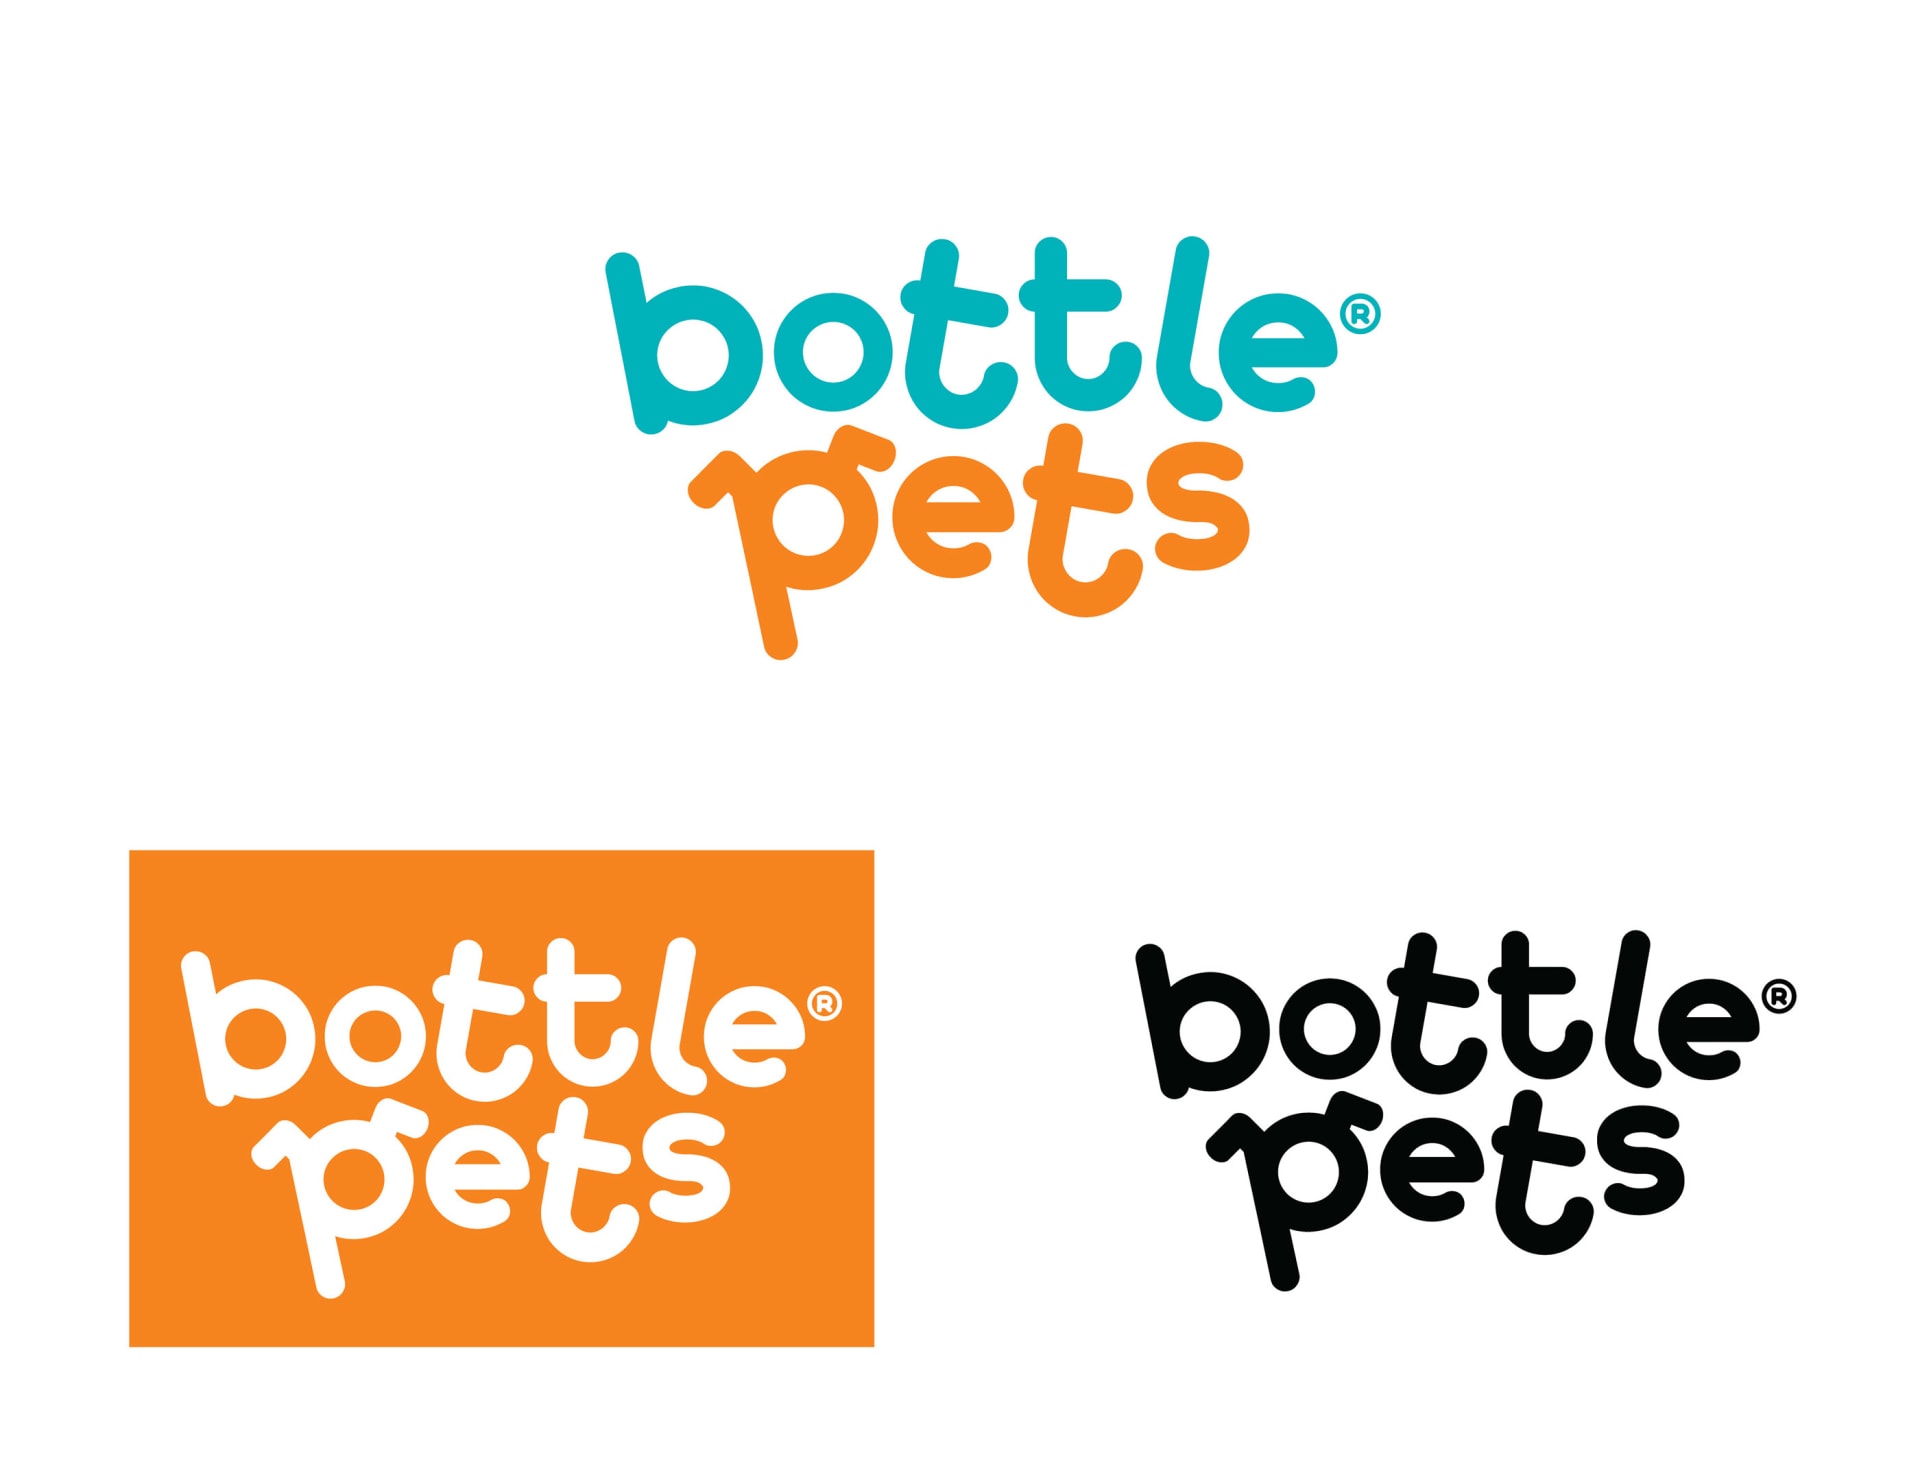 Three color variations of the Bottle Pets logo.